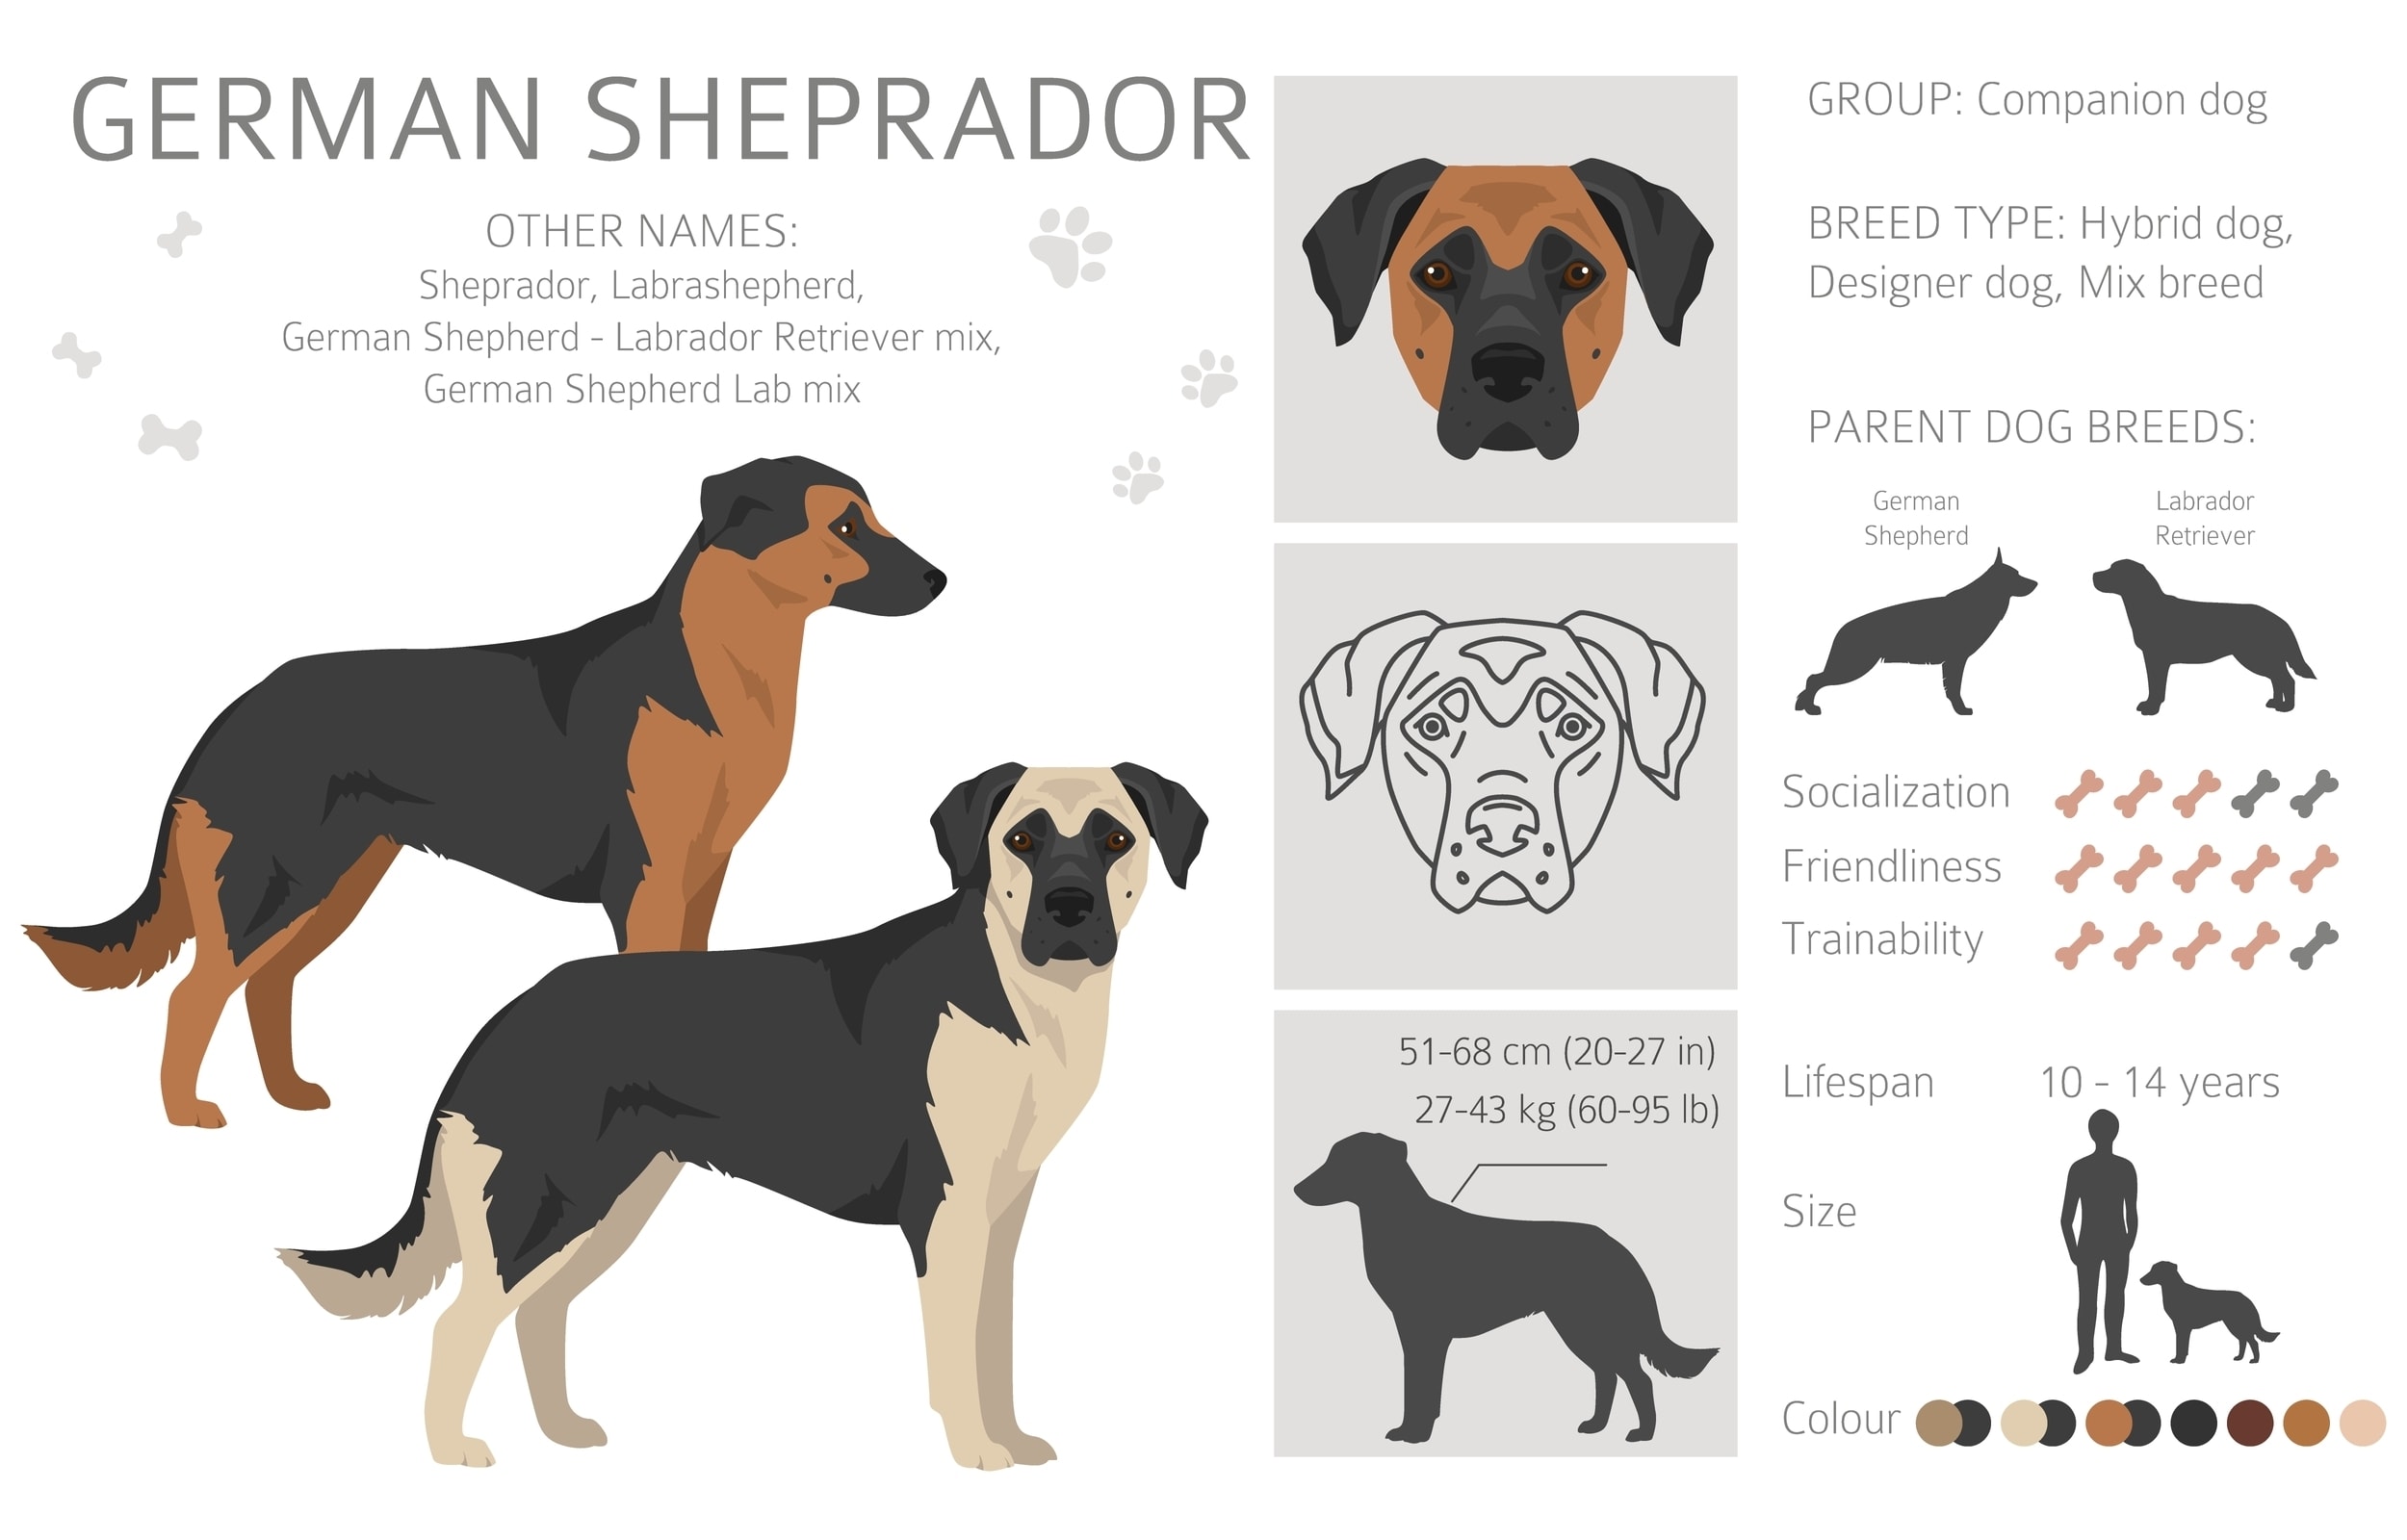 An infographic of the characteristics of a Sheprador